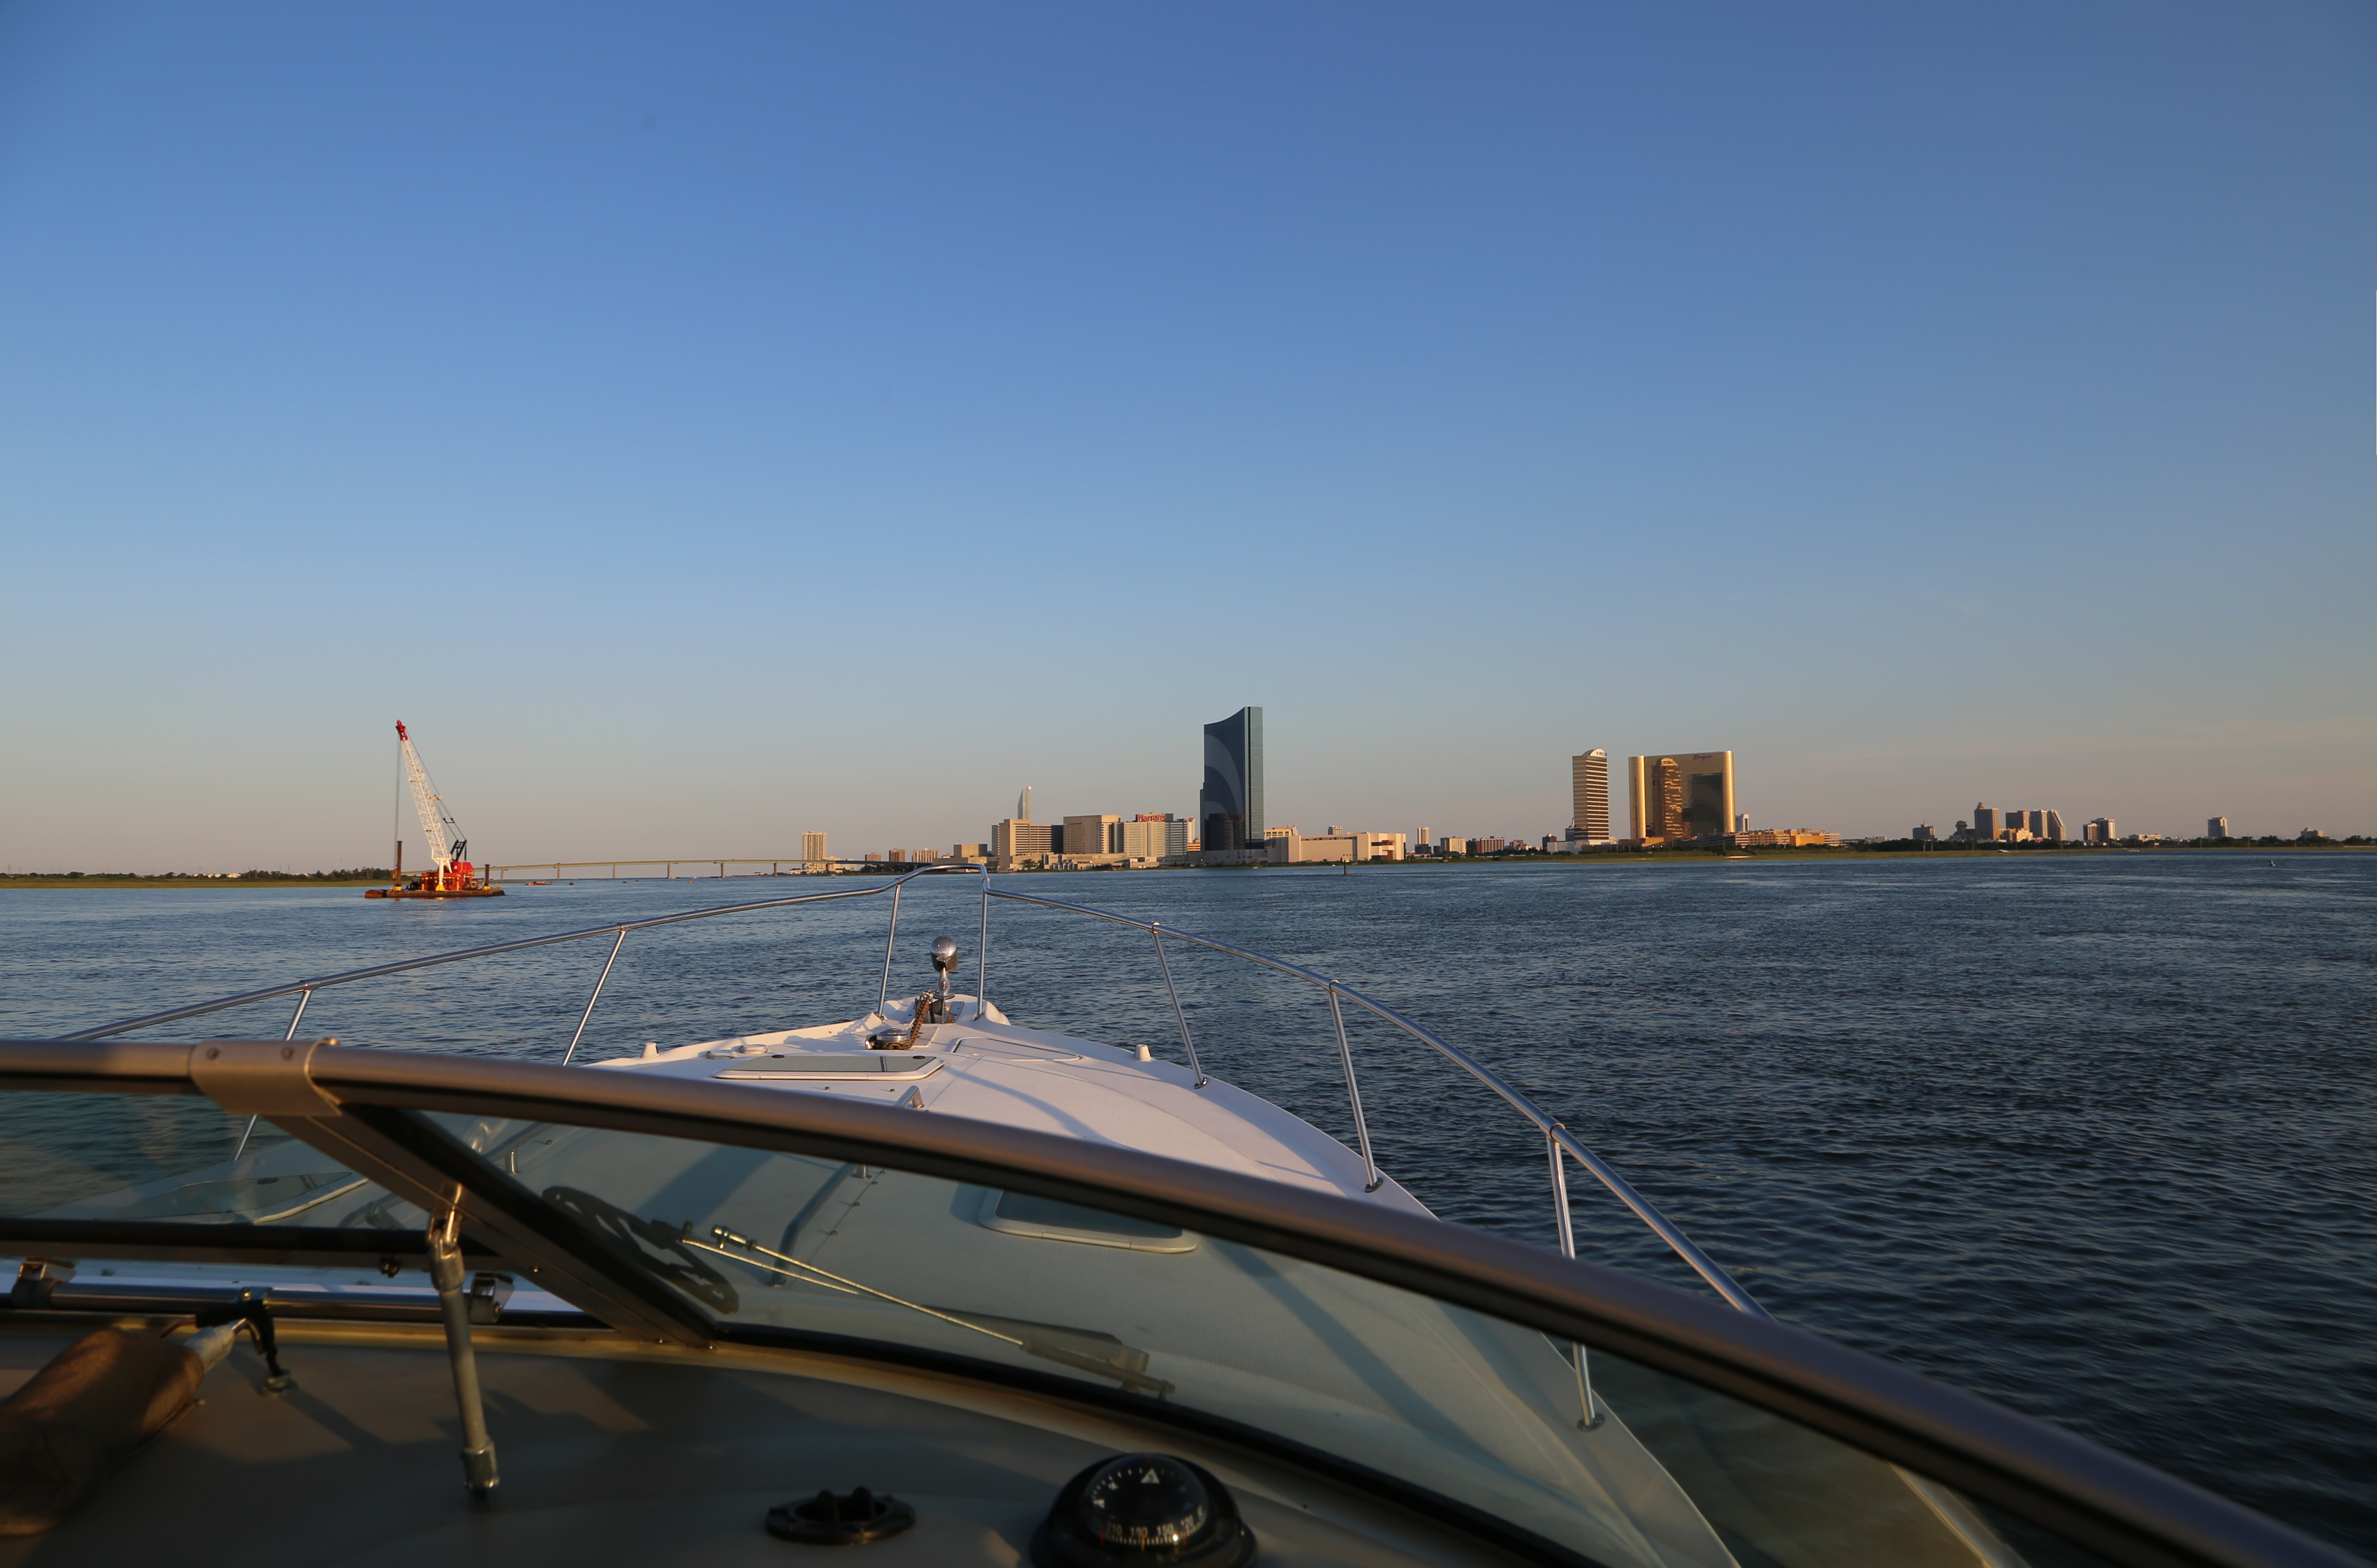 Heading into Atlantic City, from the ICW (Intracoastal Waterway)